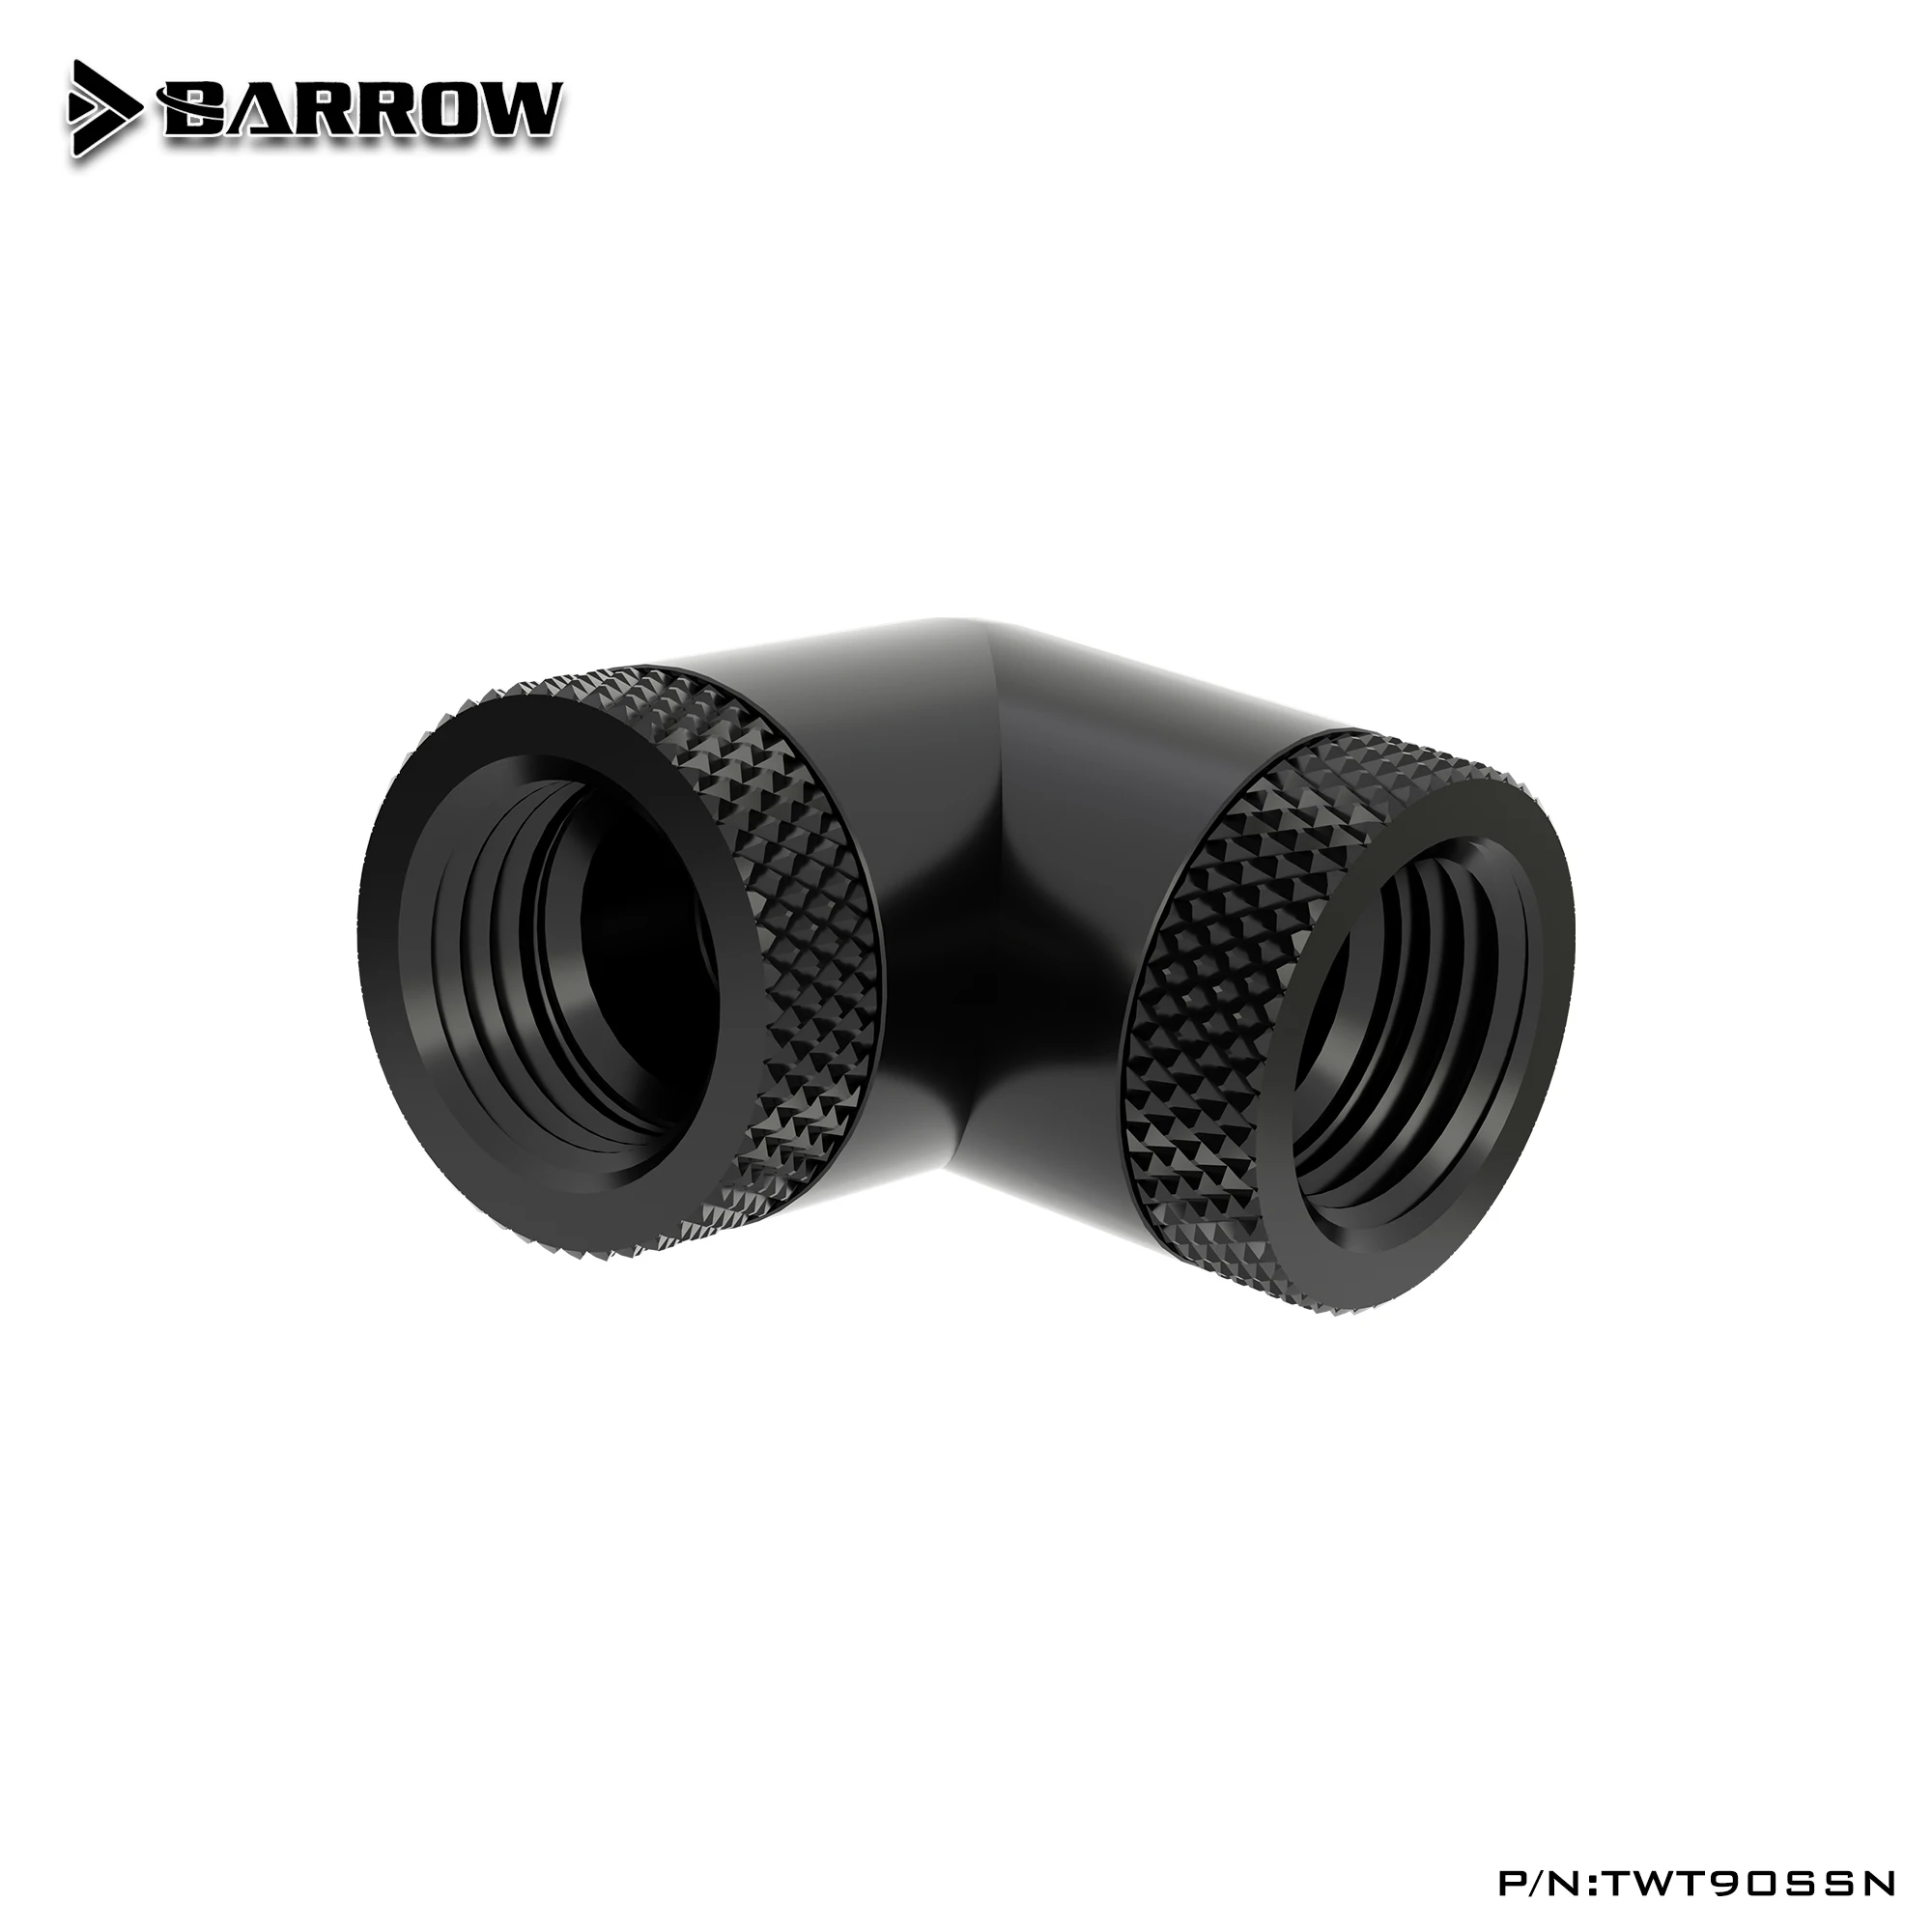 Barrow TWT90SSN 8pcs PC Water Cooling 90 Degree Fitting G1/4 Dual Female Silver/Black/White/Gold Adaptors enlarge